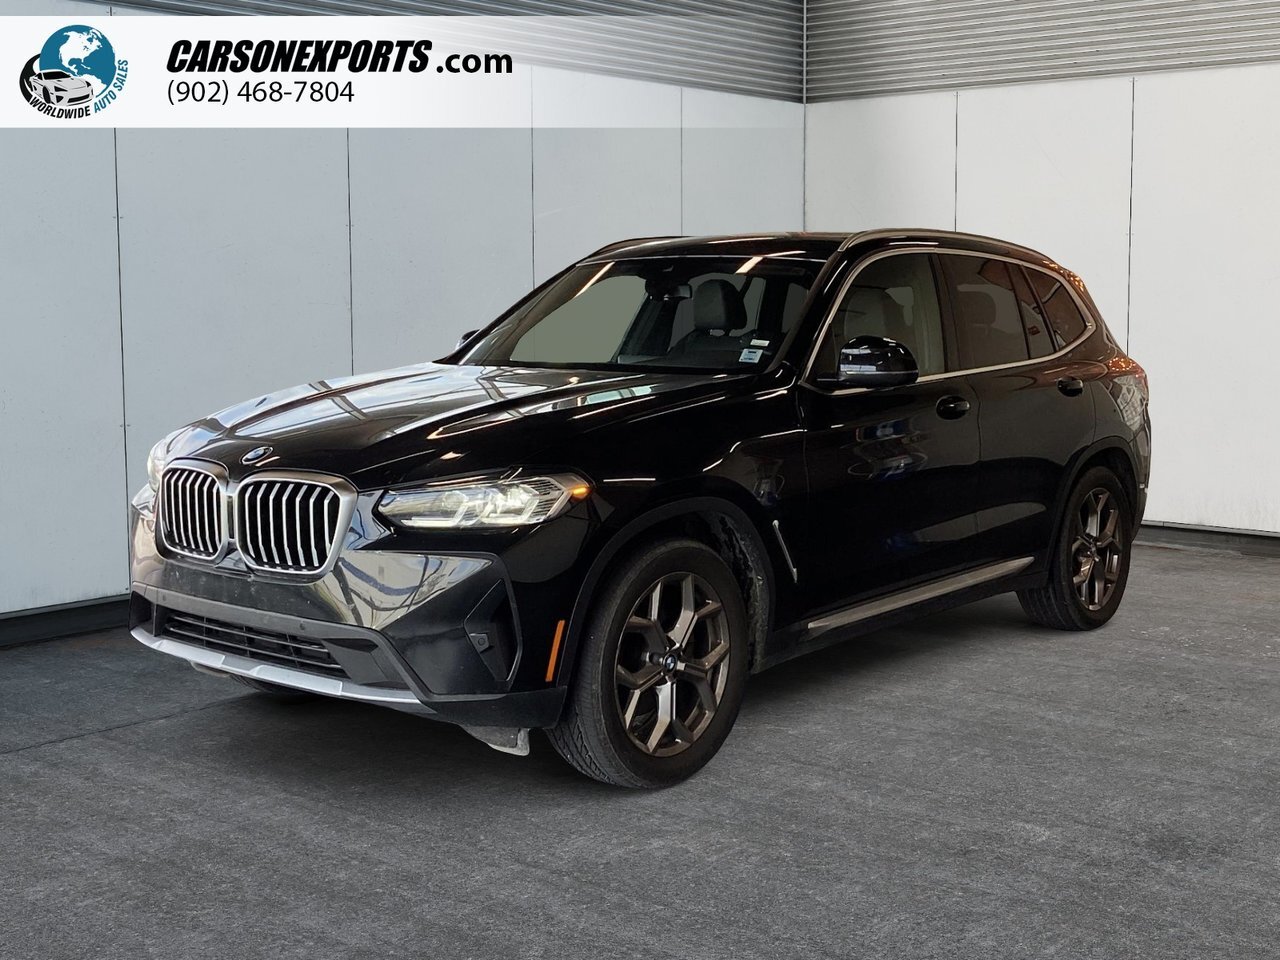 2022 BMW X3 XDrive30i The best place to buy a used car. Period